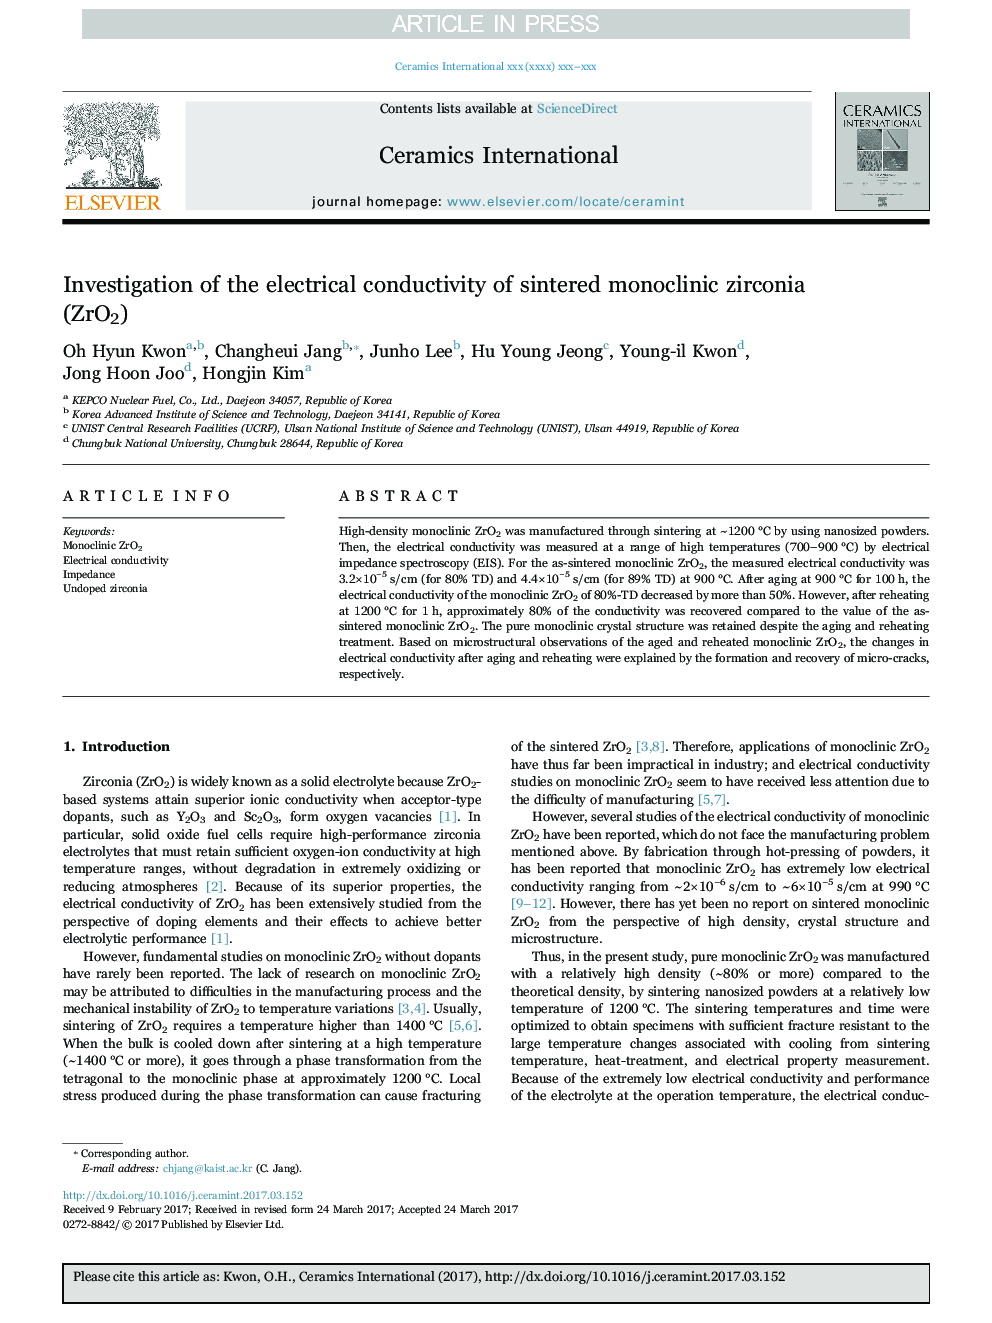 Investigation of the electrical conductivity of sintered monoclinic zirconia (ZrO2)